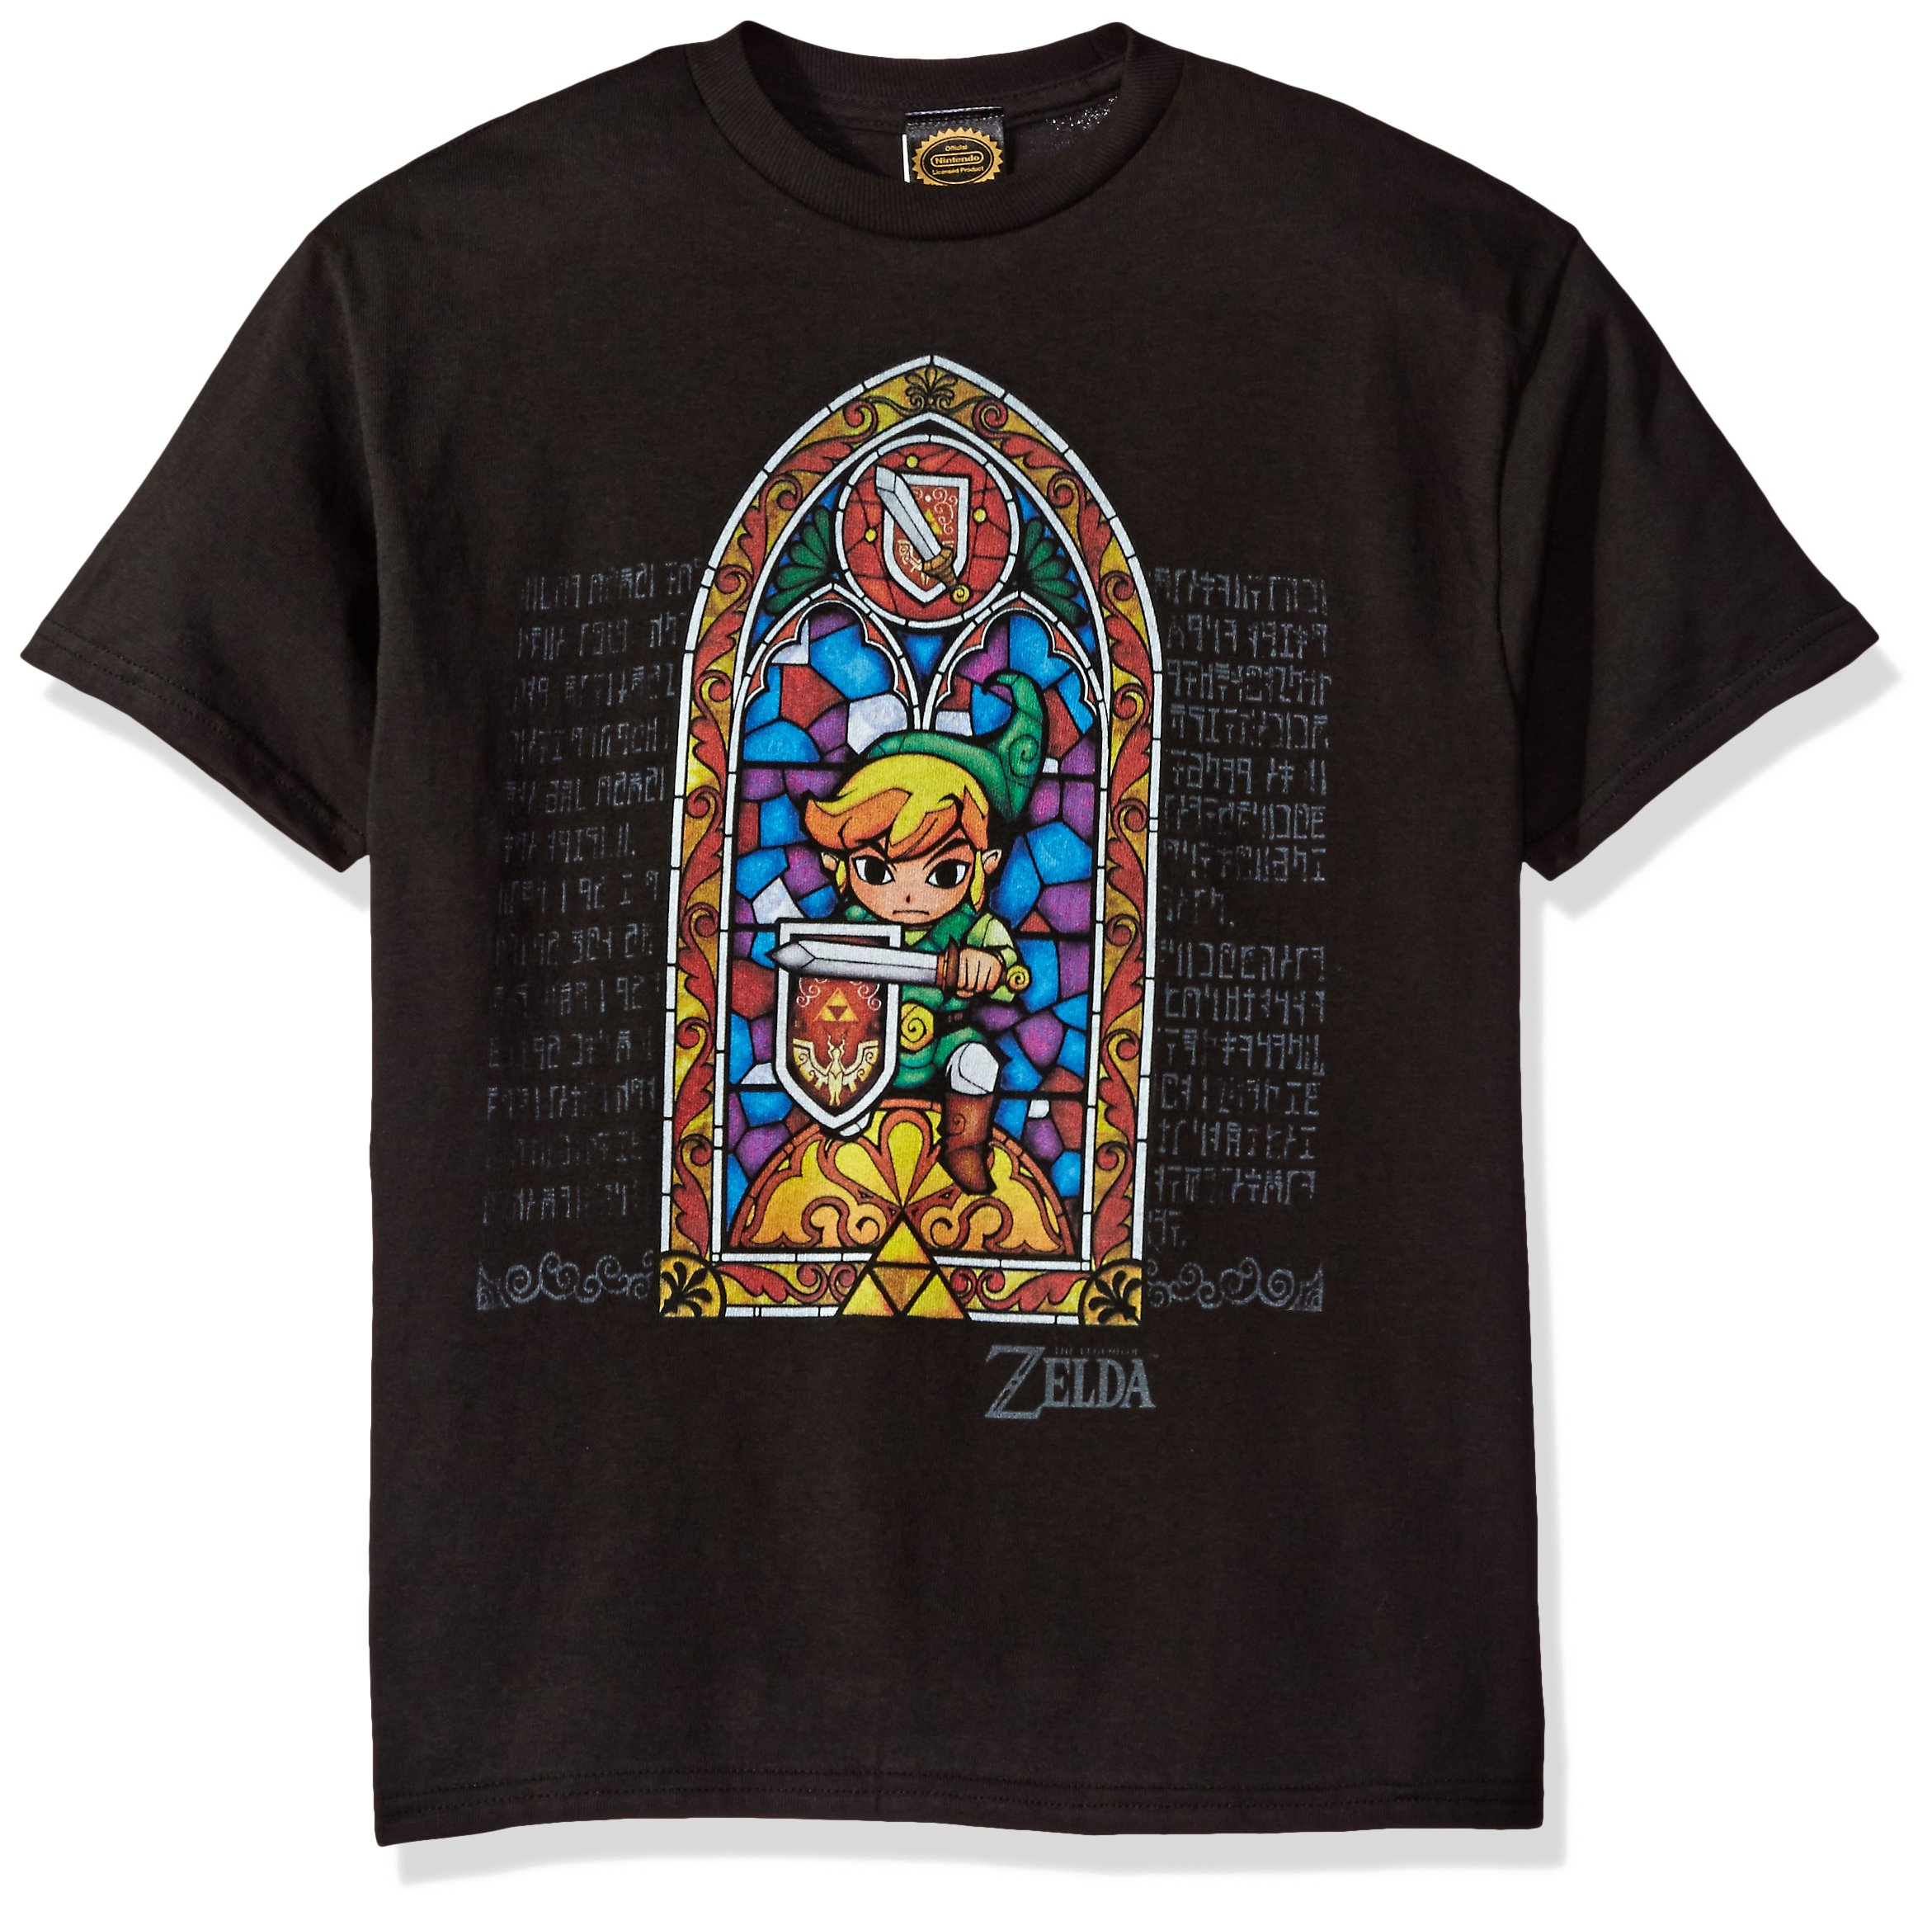 Nintendo Boy's Stained Glass T-Shirt